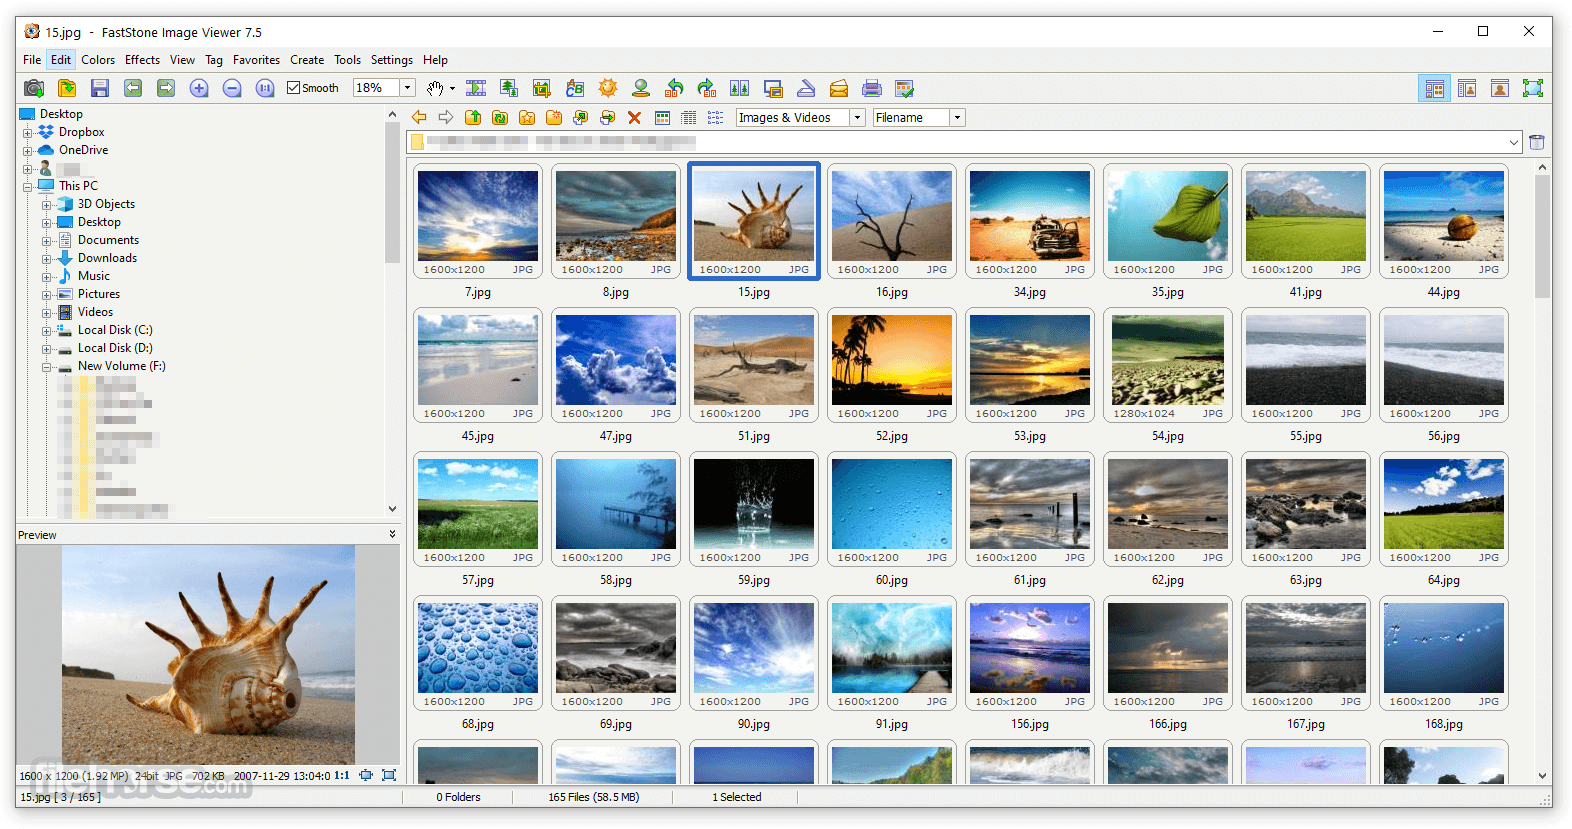 download faststone image viewer